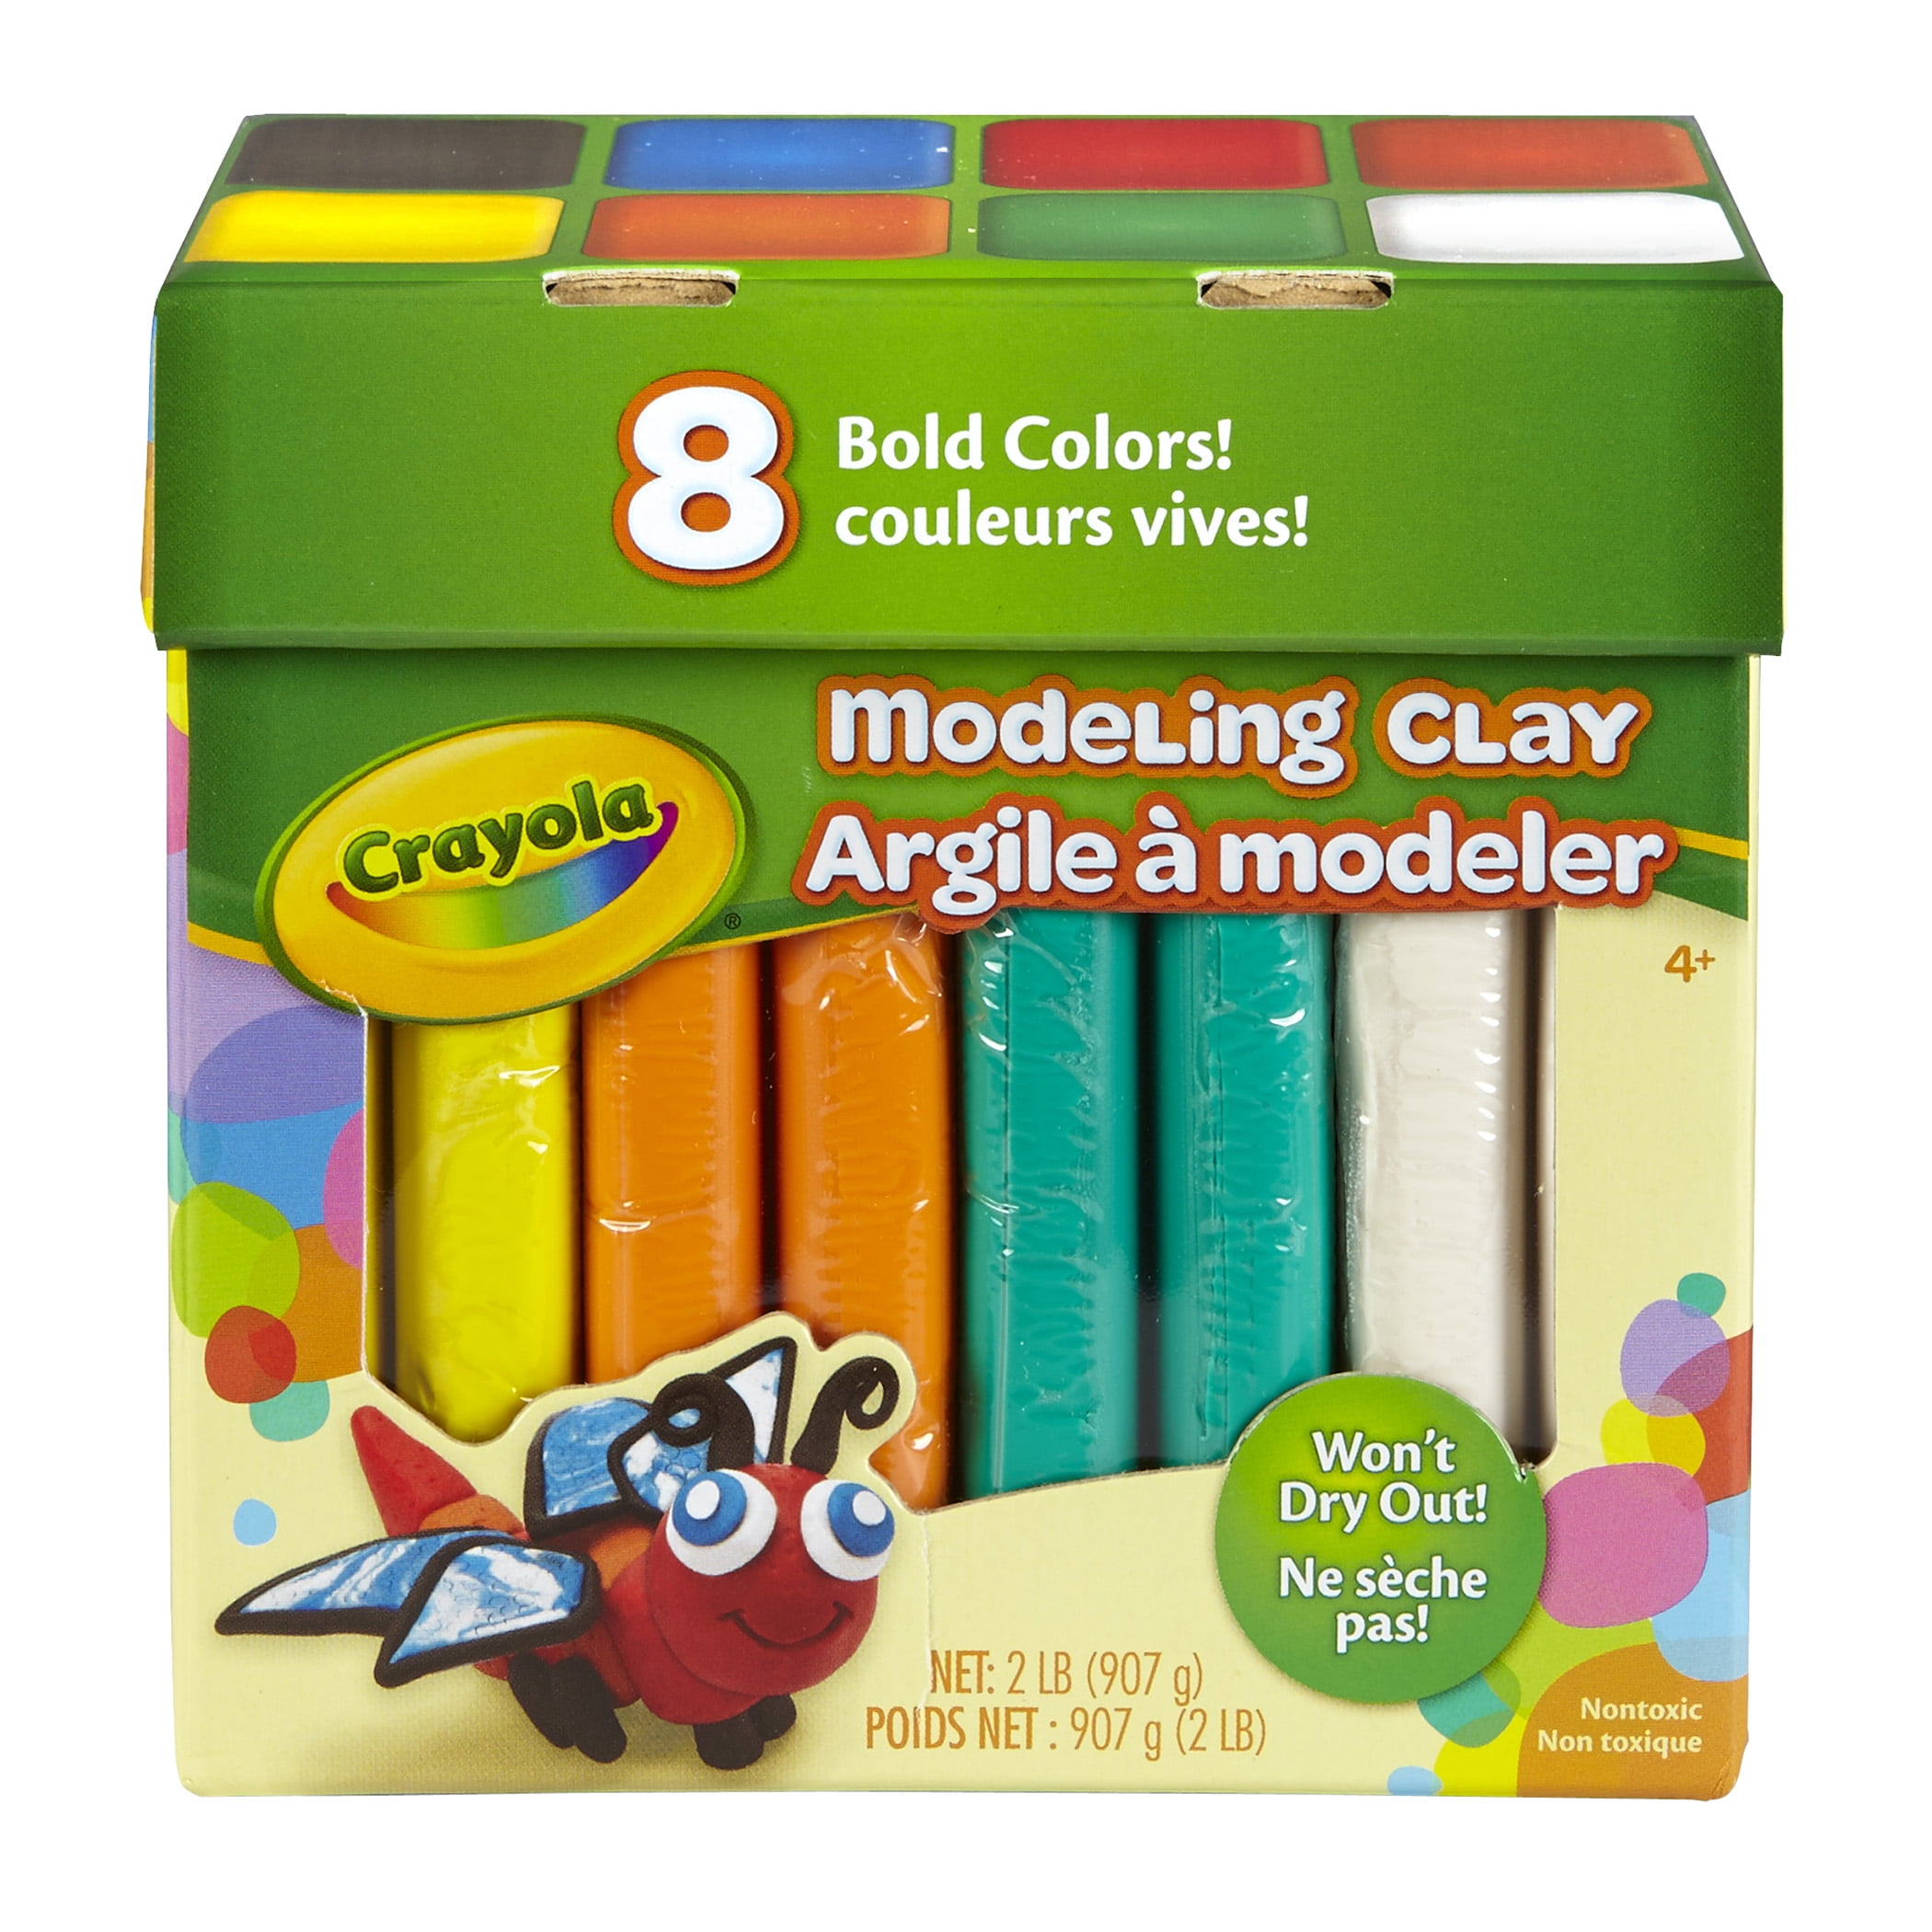 Pepy Plastilina Reusable and Non-Drying Modeling Clay; Set of 24